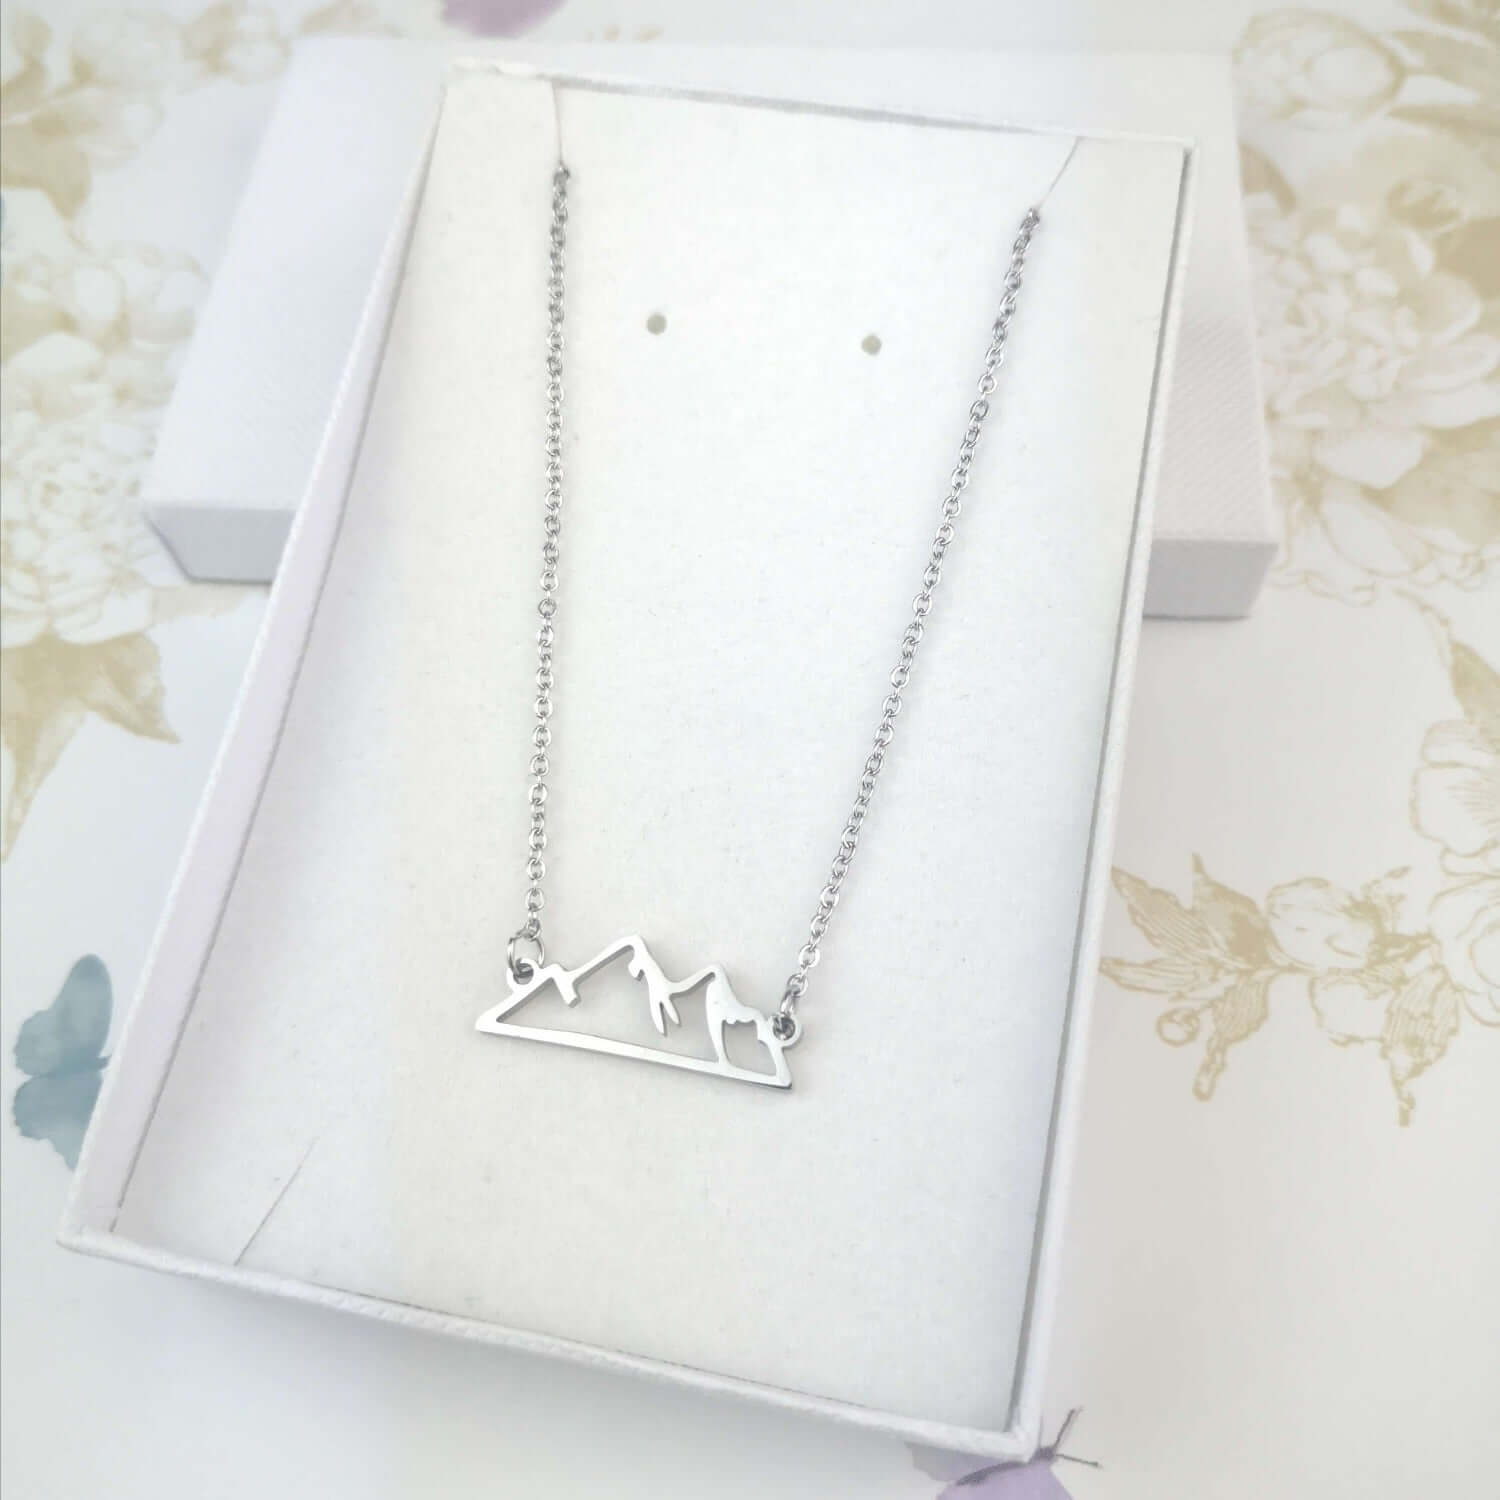 Mountain necklace in a gift box